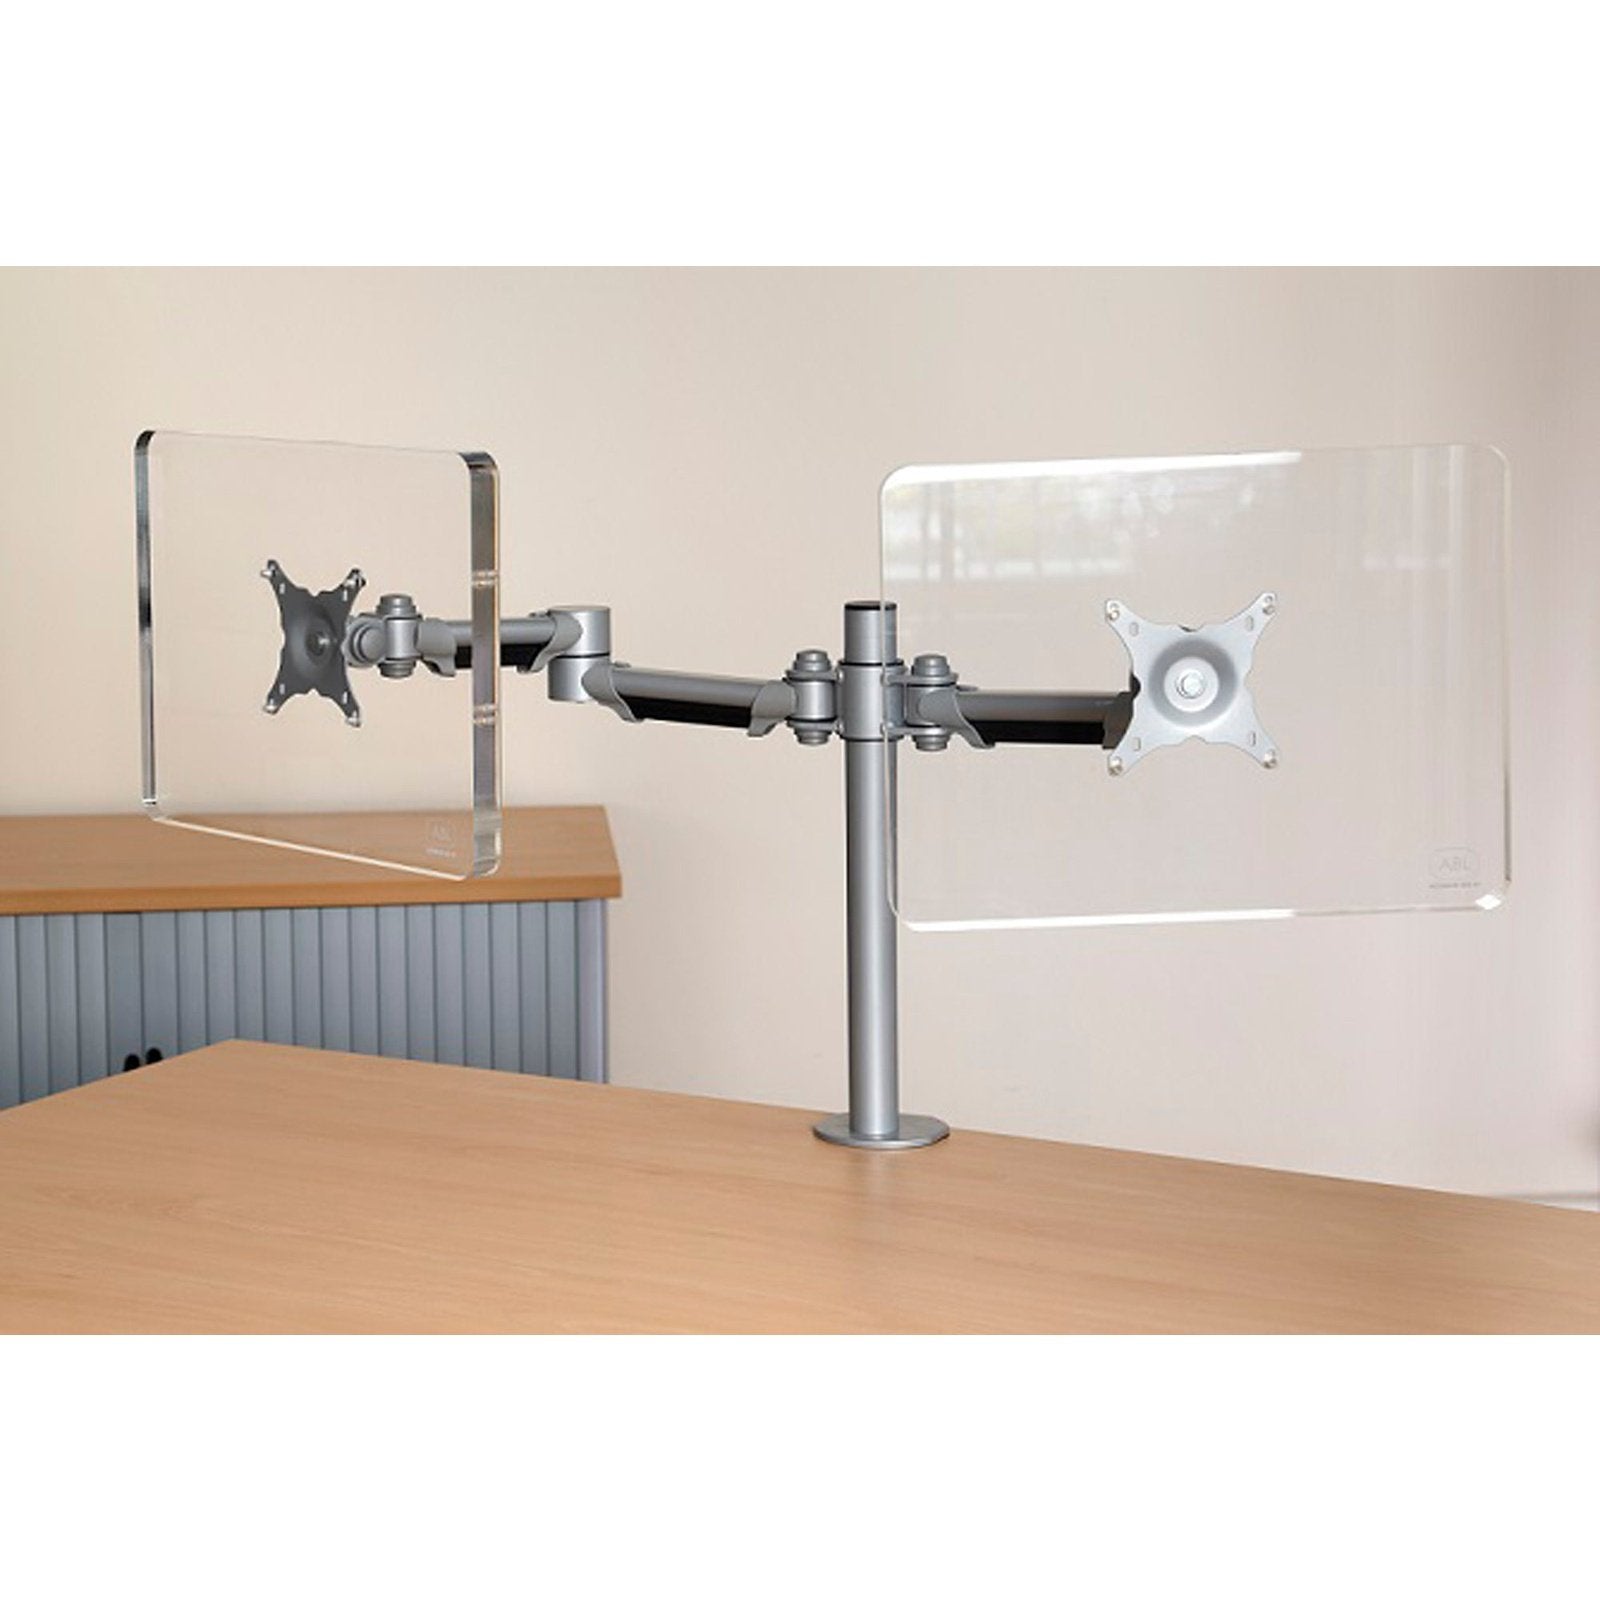 Impulse Double Height Adjustable Flat Screen Monitor Arm - Steel, Self-Assembly, 420mm Height, 1-Year Guarantee